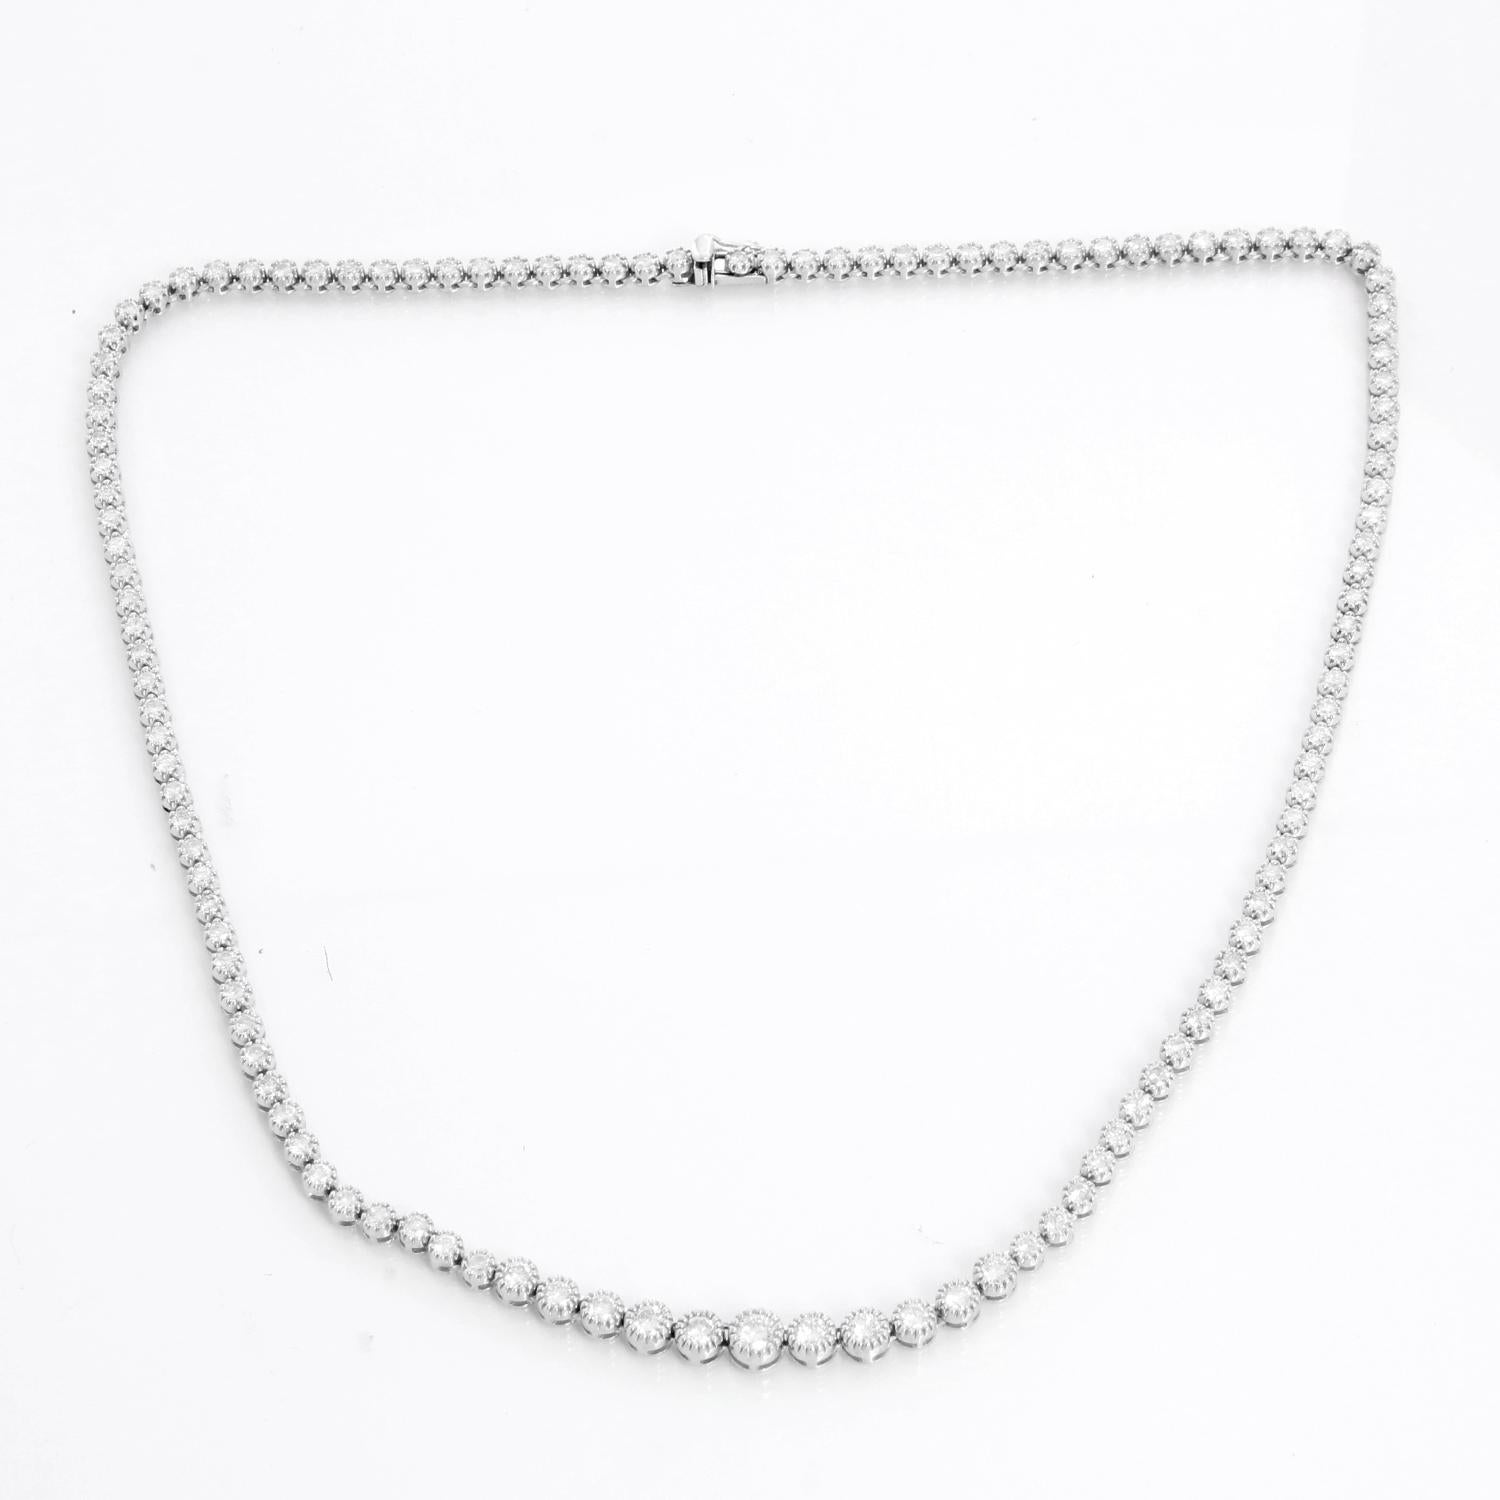 Platinum Diamond Hobnail Tennis Necklace 5 Carats In Excellent Condition For Sale In Dallas, TX